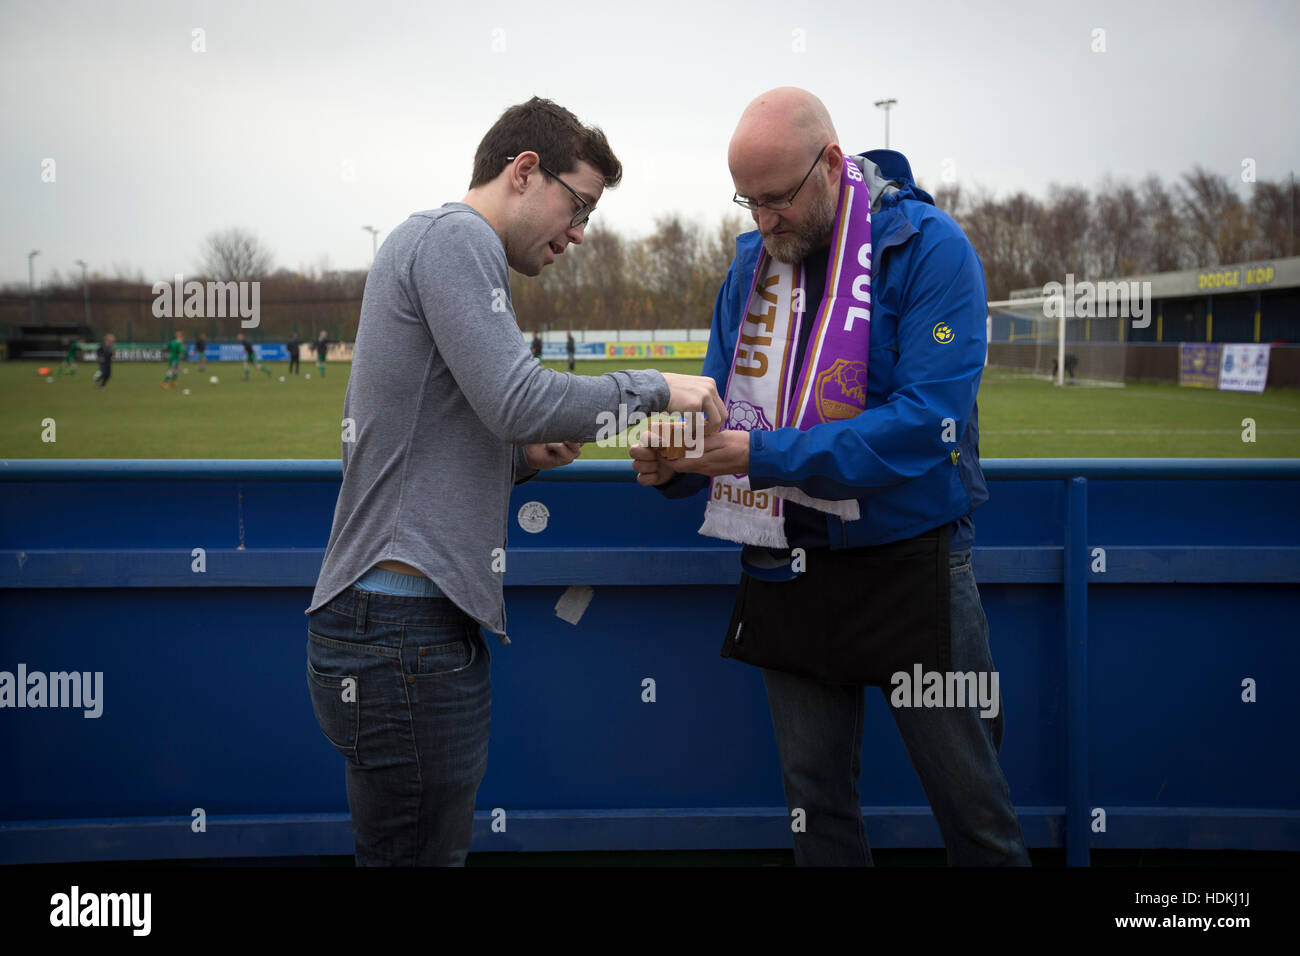 A spectator buying a 'golden goal' ticket at the Delta Taxis Stadium, Bootle, Merseyside before City of Liverpool hosted Holker Old Boys in a North West Counties League division one match. Founded in 2015, and aiming to be the premier non-League club in Liverpool, City were admitted to the League at the start of the 2016-17 season and were using Bootle FC's ground for home matches. A 6-1 victory over their visitors took 'the Purps' to the top of the division, in a match watched by 483 spectators. Stock Photo